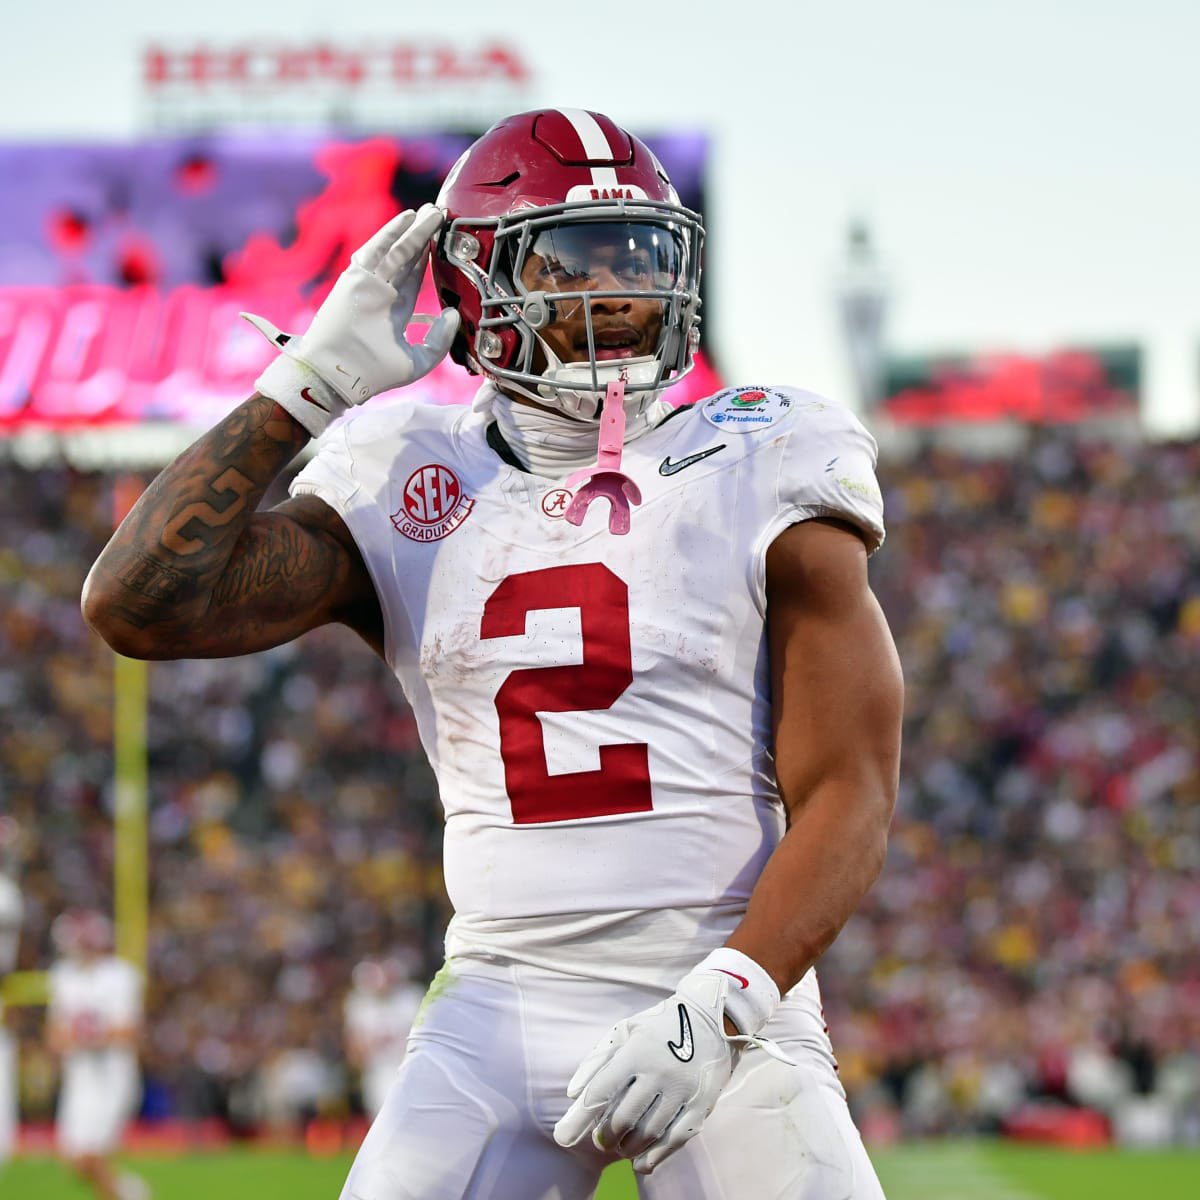 All of these NFL teams thus far are going to regret passing on Jase McClellan. Prepare your apologies in advance. 

#CollegeFootball #RollTide #BamaFactor #NFLDraft